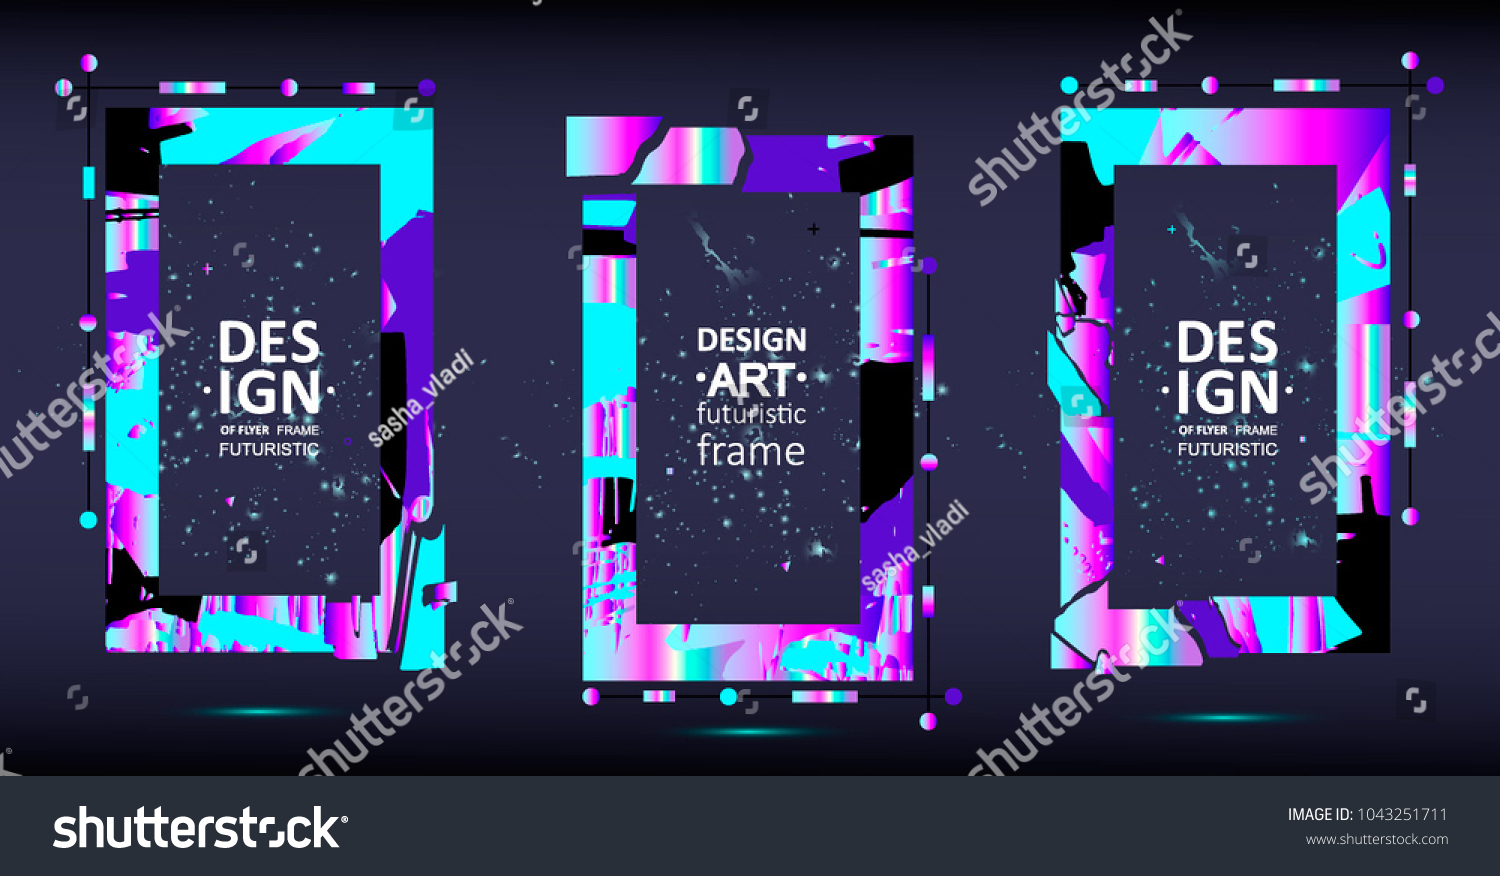 Placard templates set with abstract shapes, 80s memphis geometric style flat and line design elements. Retro art for a4 covers, banners, flyers and posters. Eps10 vector illustrations #1043251711